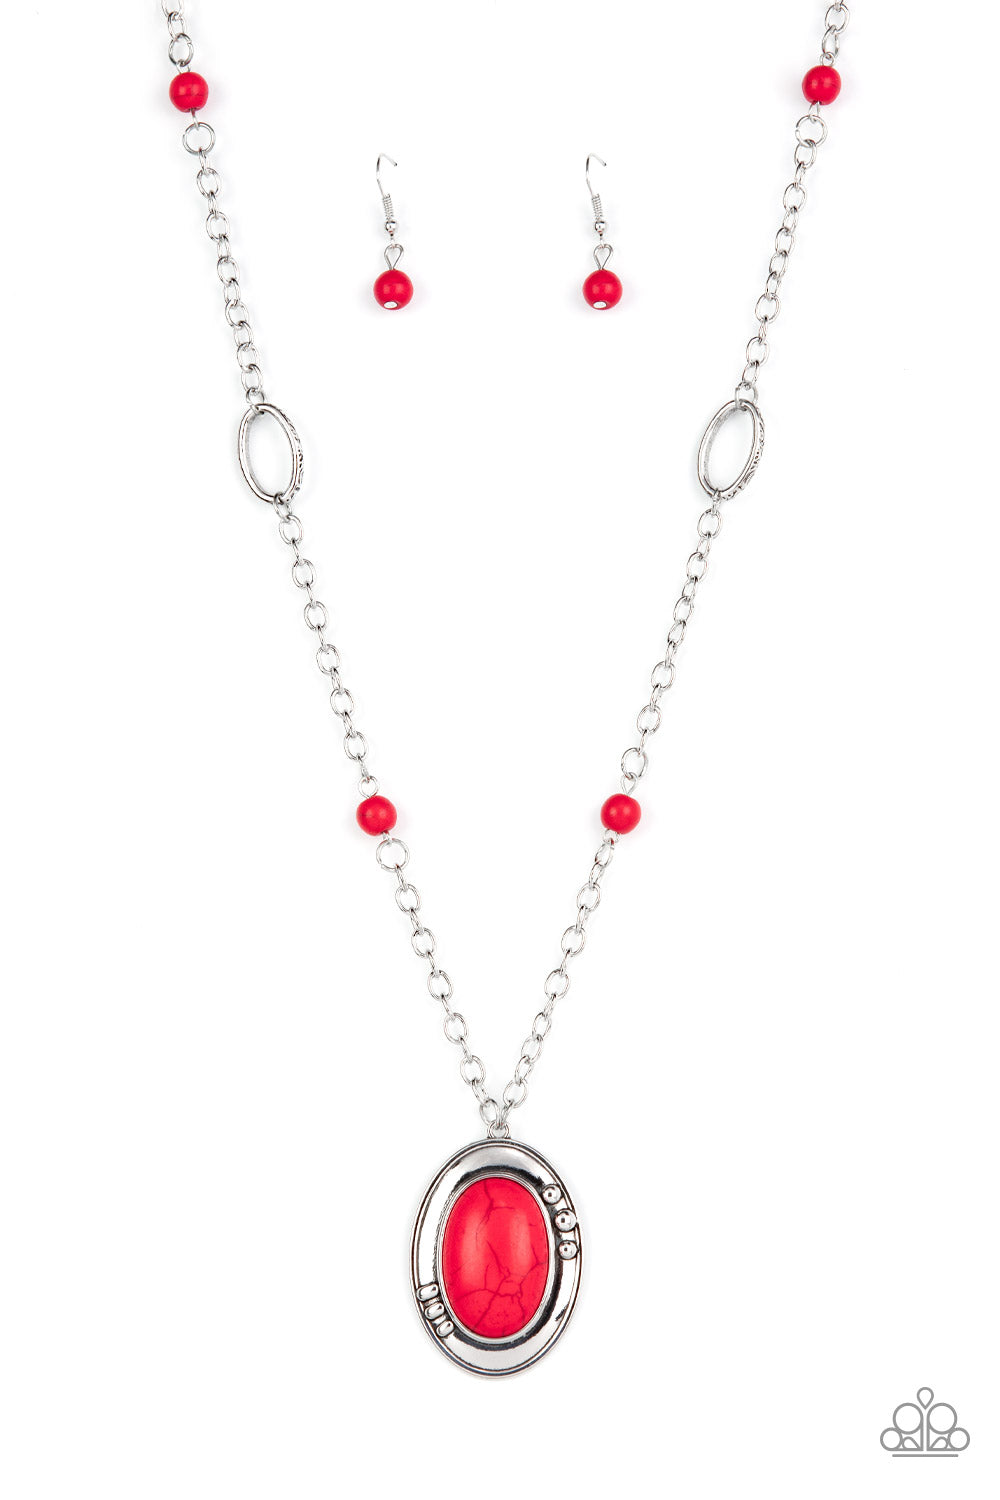 Mojave Meditation - Red Stone Necklace - Paparazzi Accessories